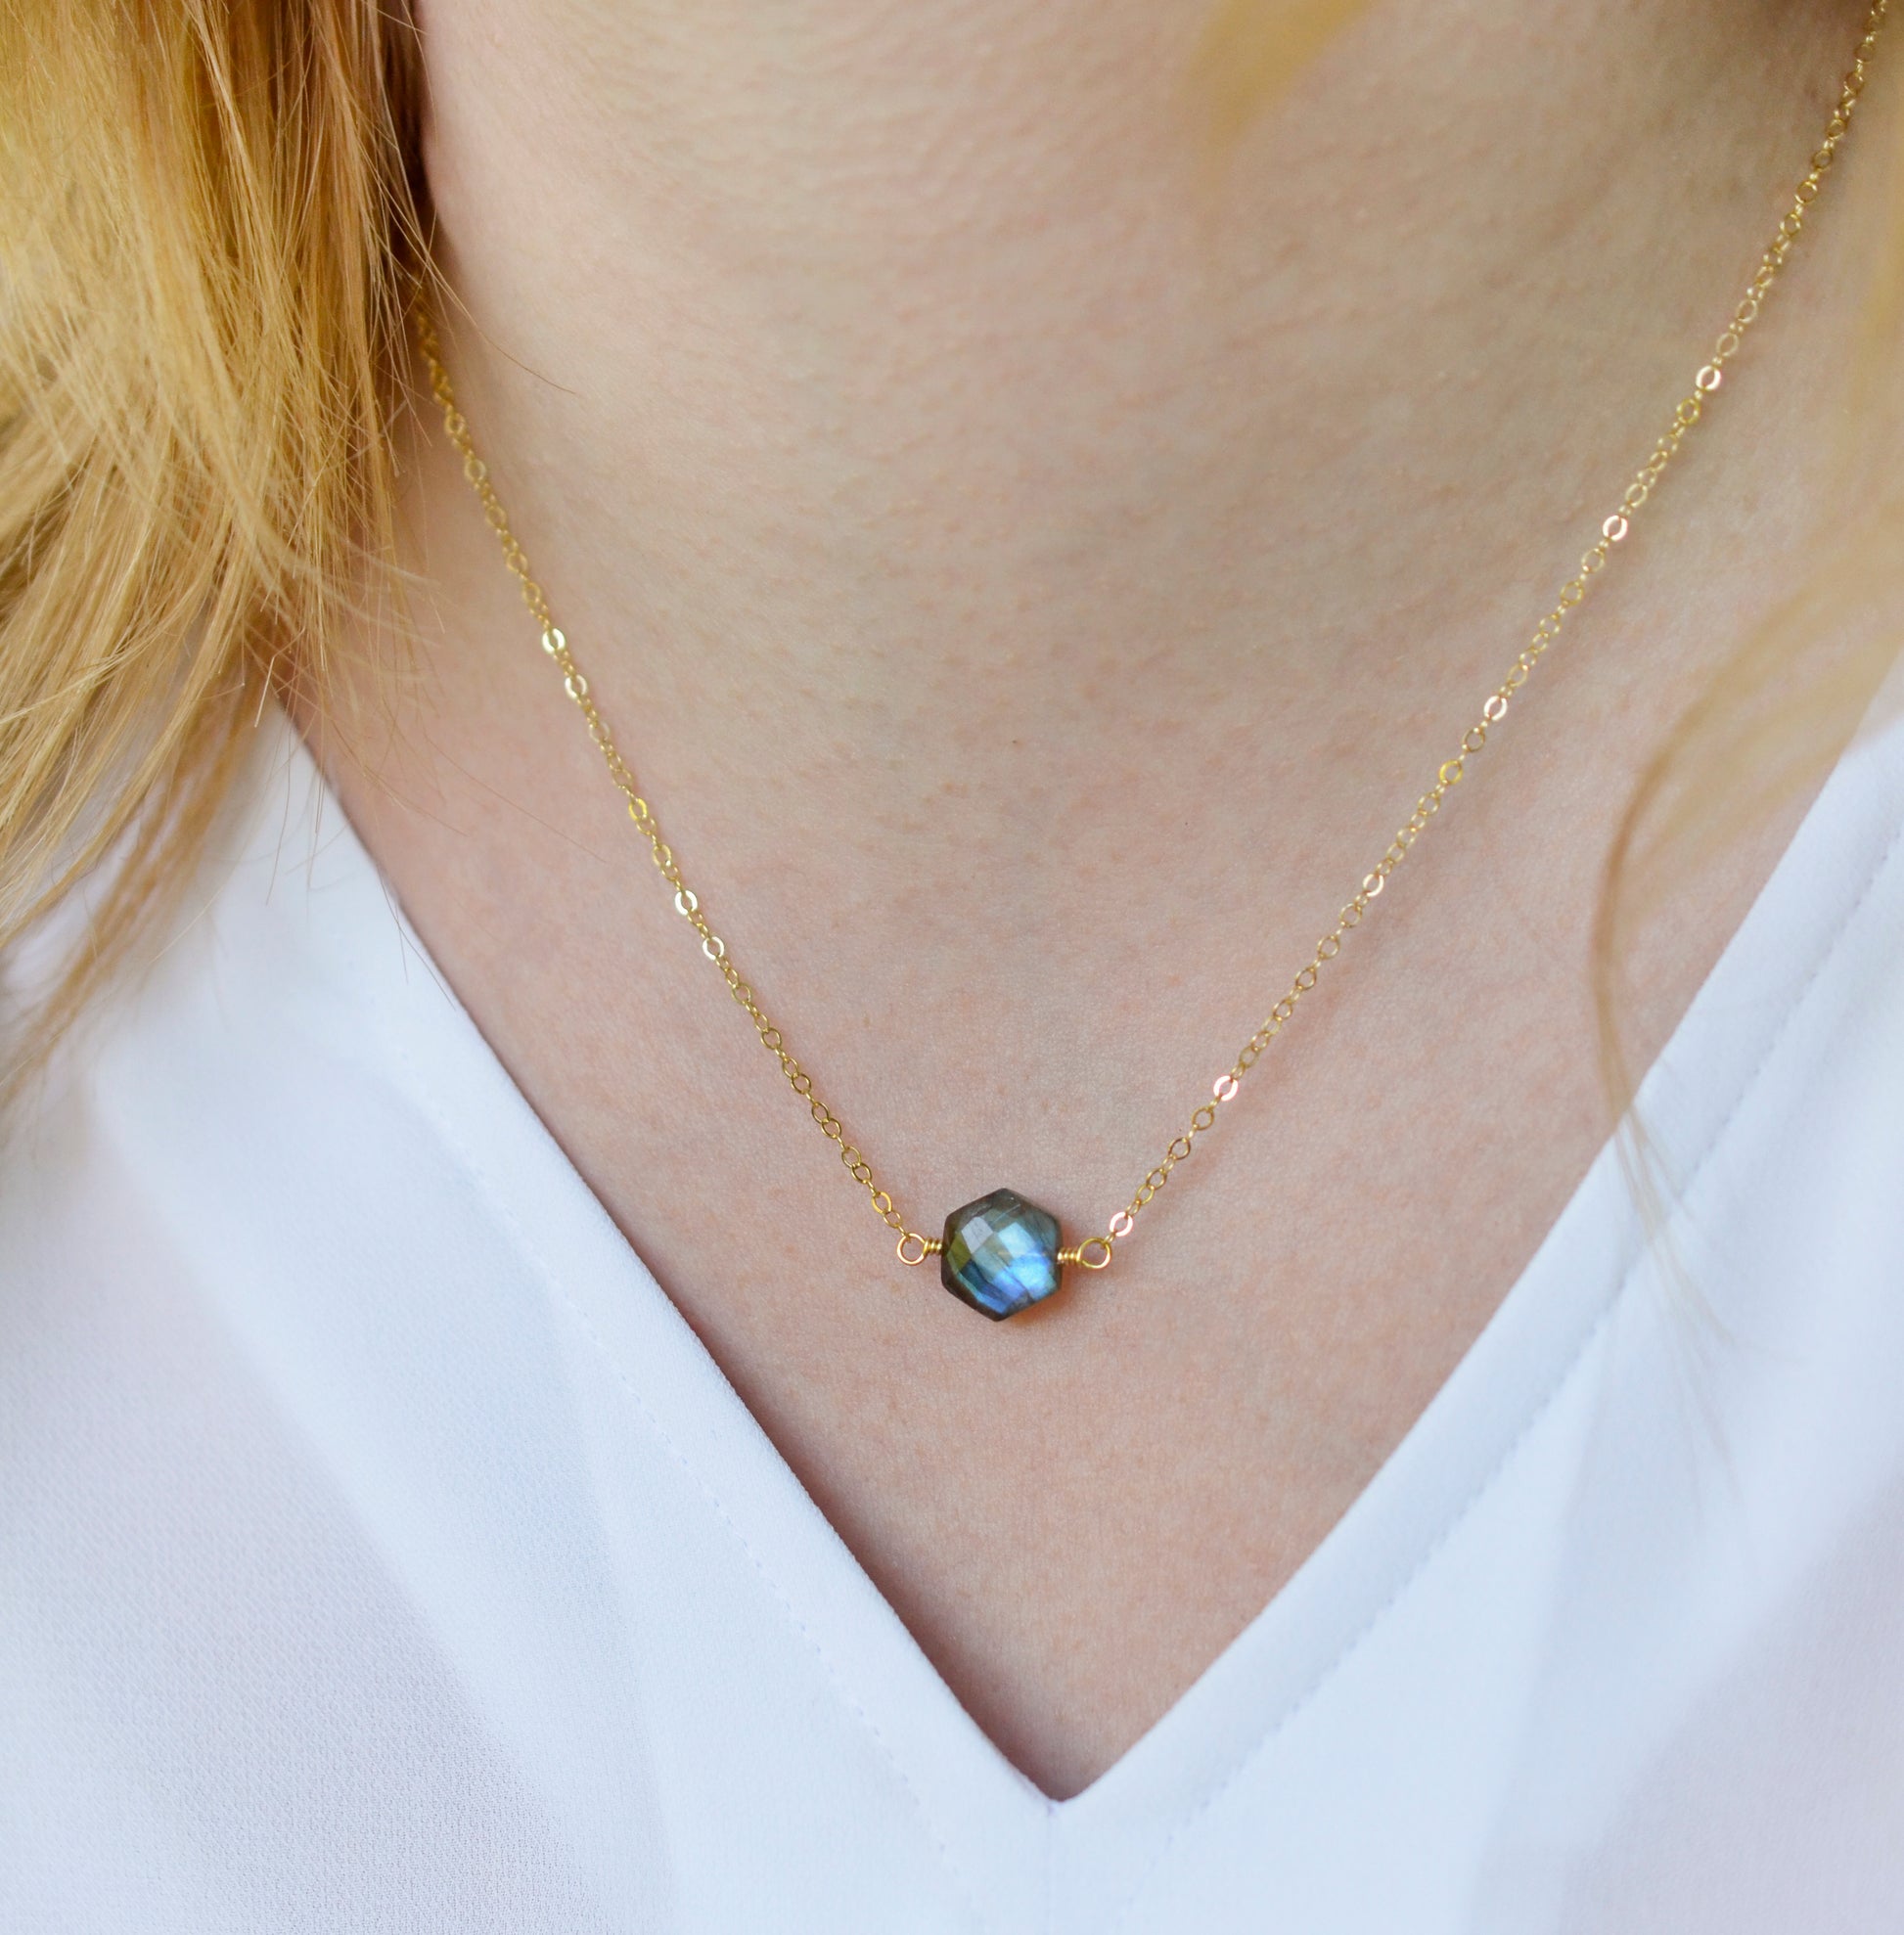 Blue-green flashing hexagonal Labradorite gemstone modeled in 14k gold filled and the fixed style.